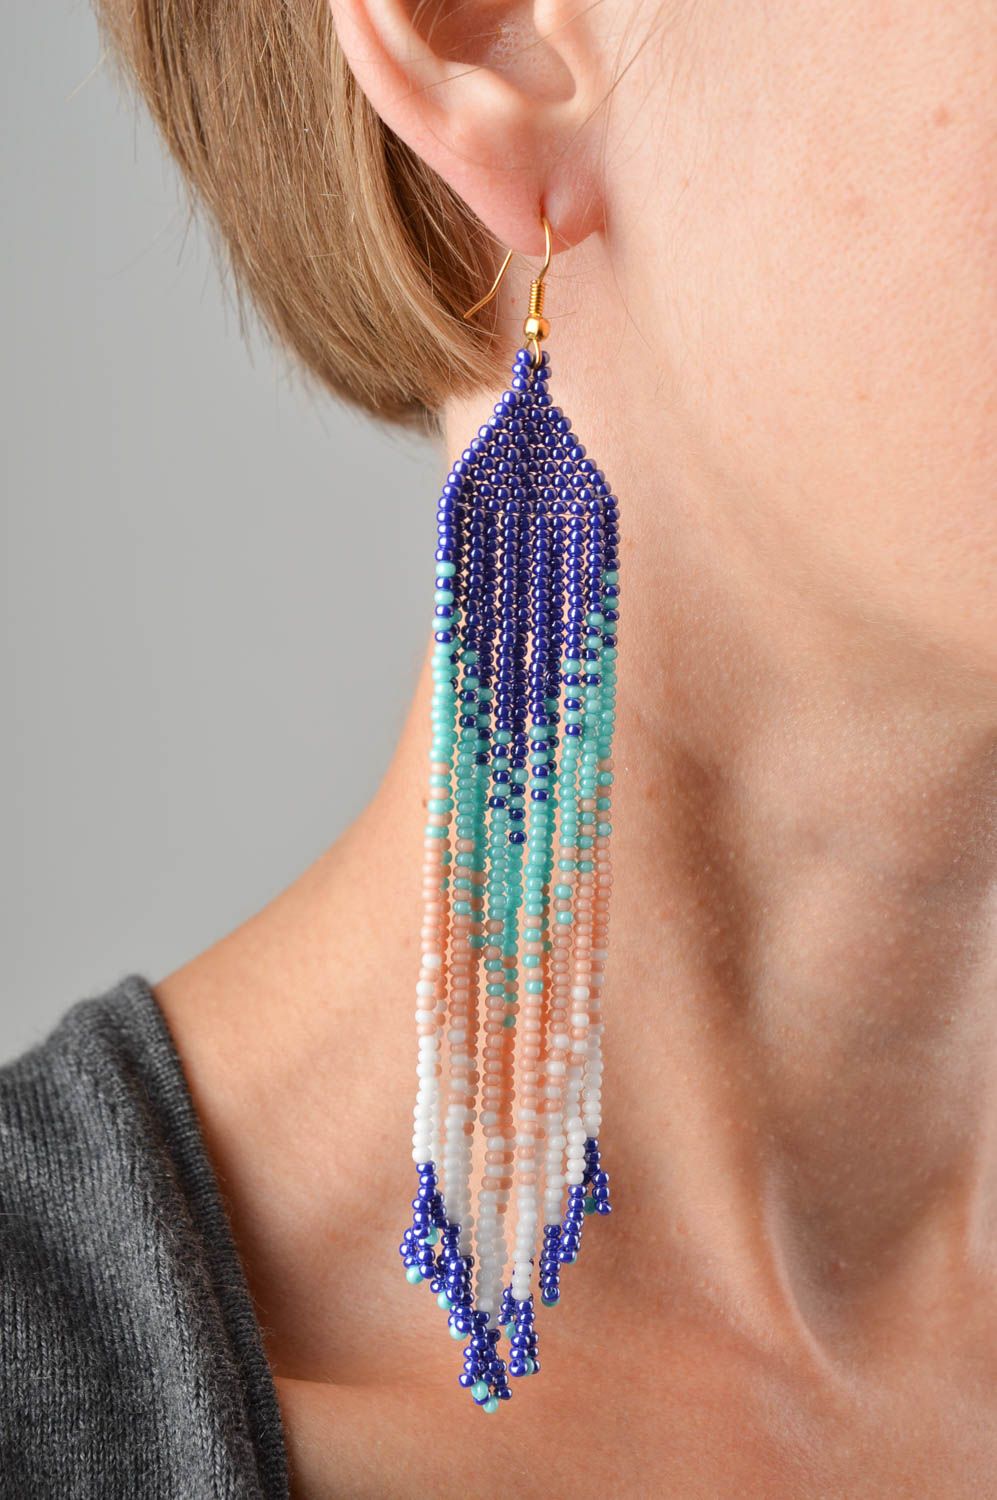 Handcrafted long earrings designer fashion jewelry beautiful women accessories photo 2